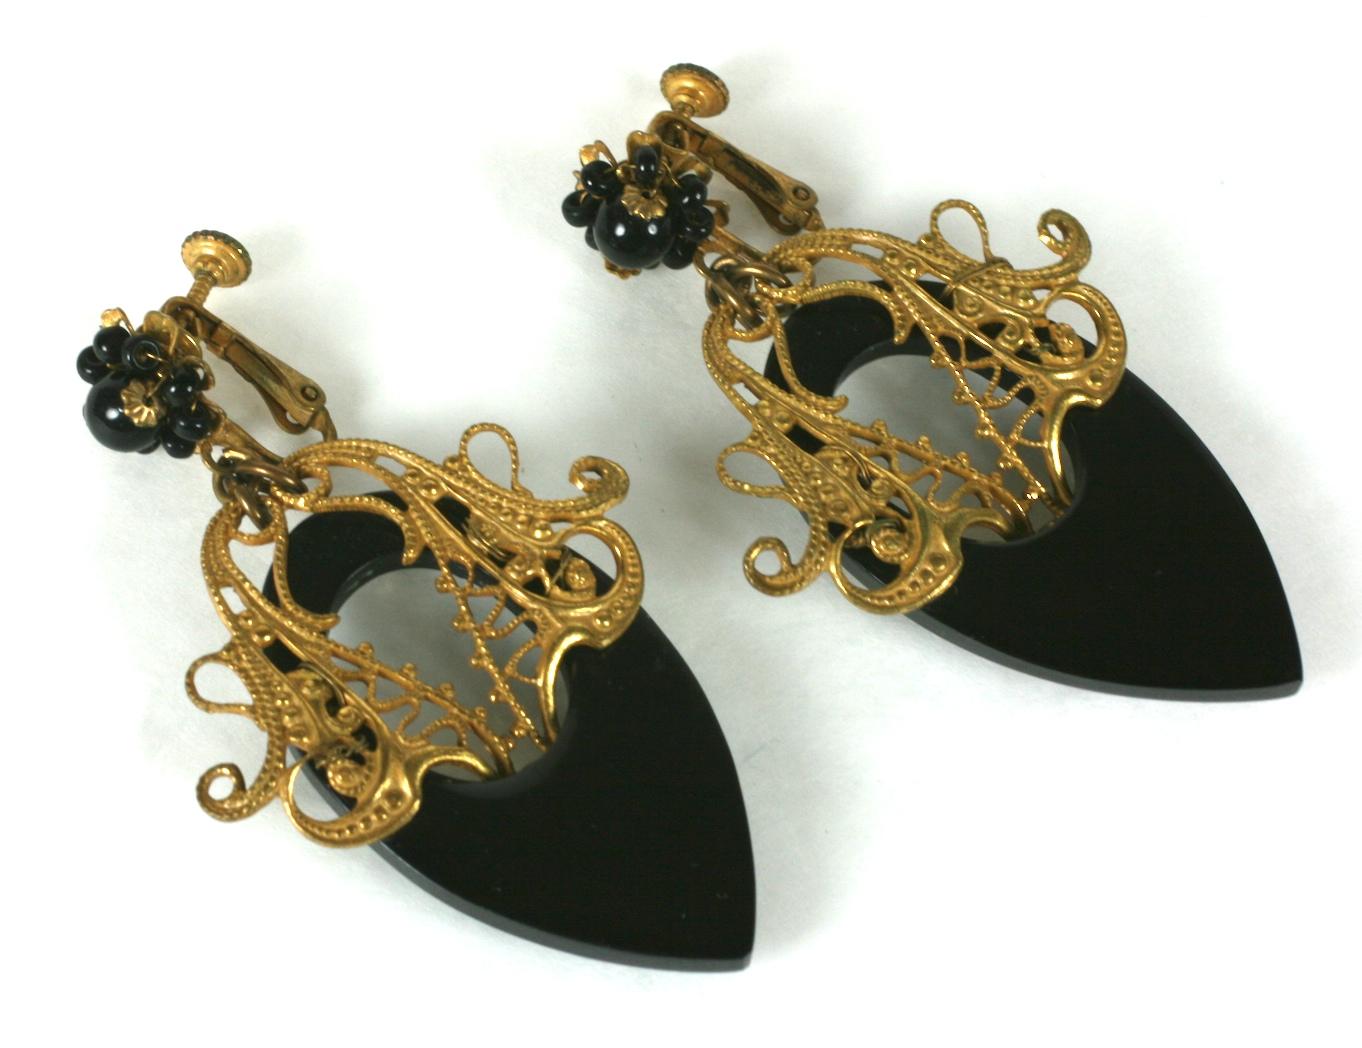 Large and attractive Miriam Haskell Victorian Revival Jet Earrings in signature Russian gilt finish. Gilt filigrees are mounted on black resin drops with seed pearl accents. Clip back fittings. 1950's USA.
2.75